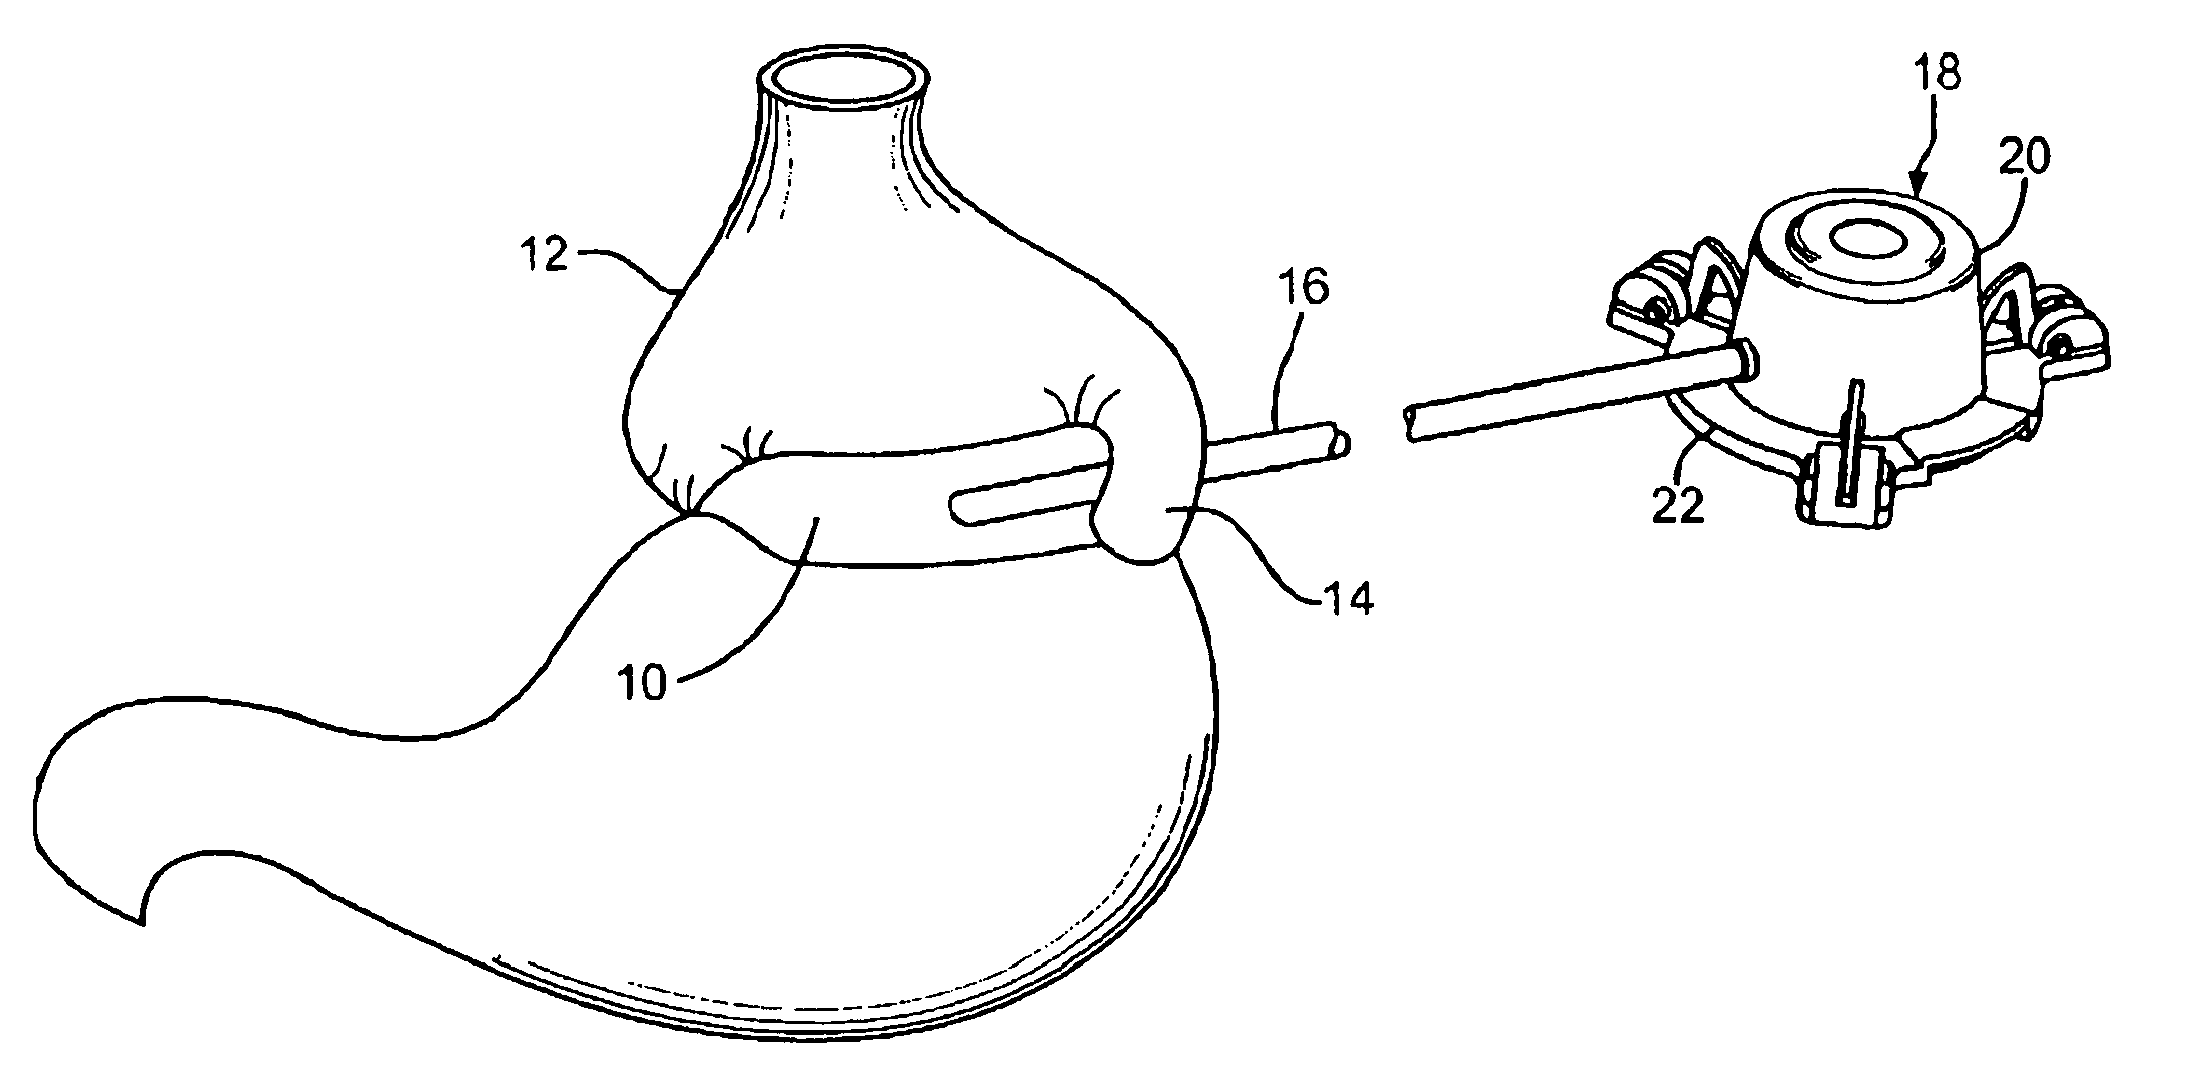 Subcutaneous self attaching injection port with integral moveable retention members